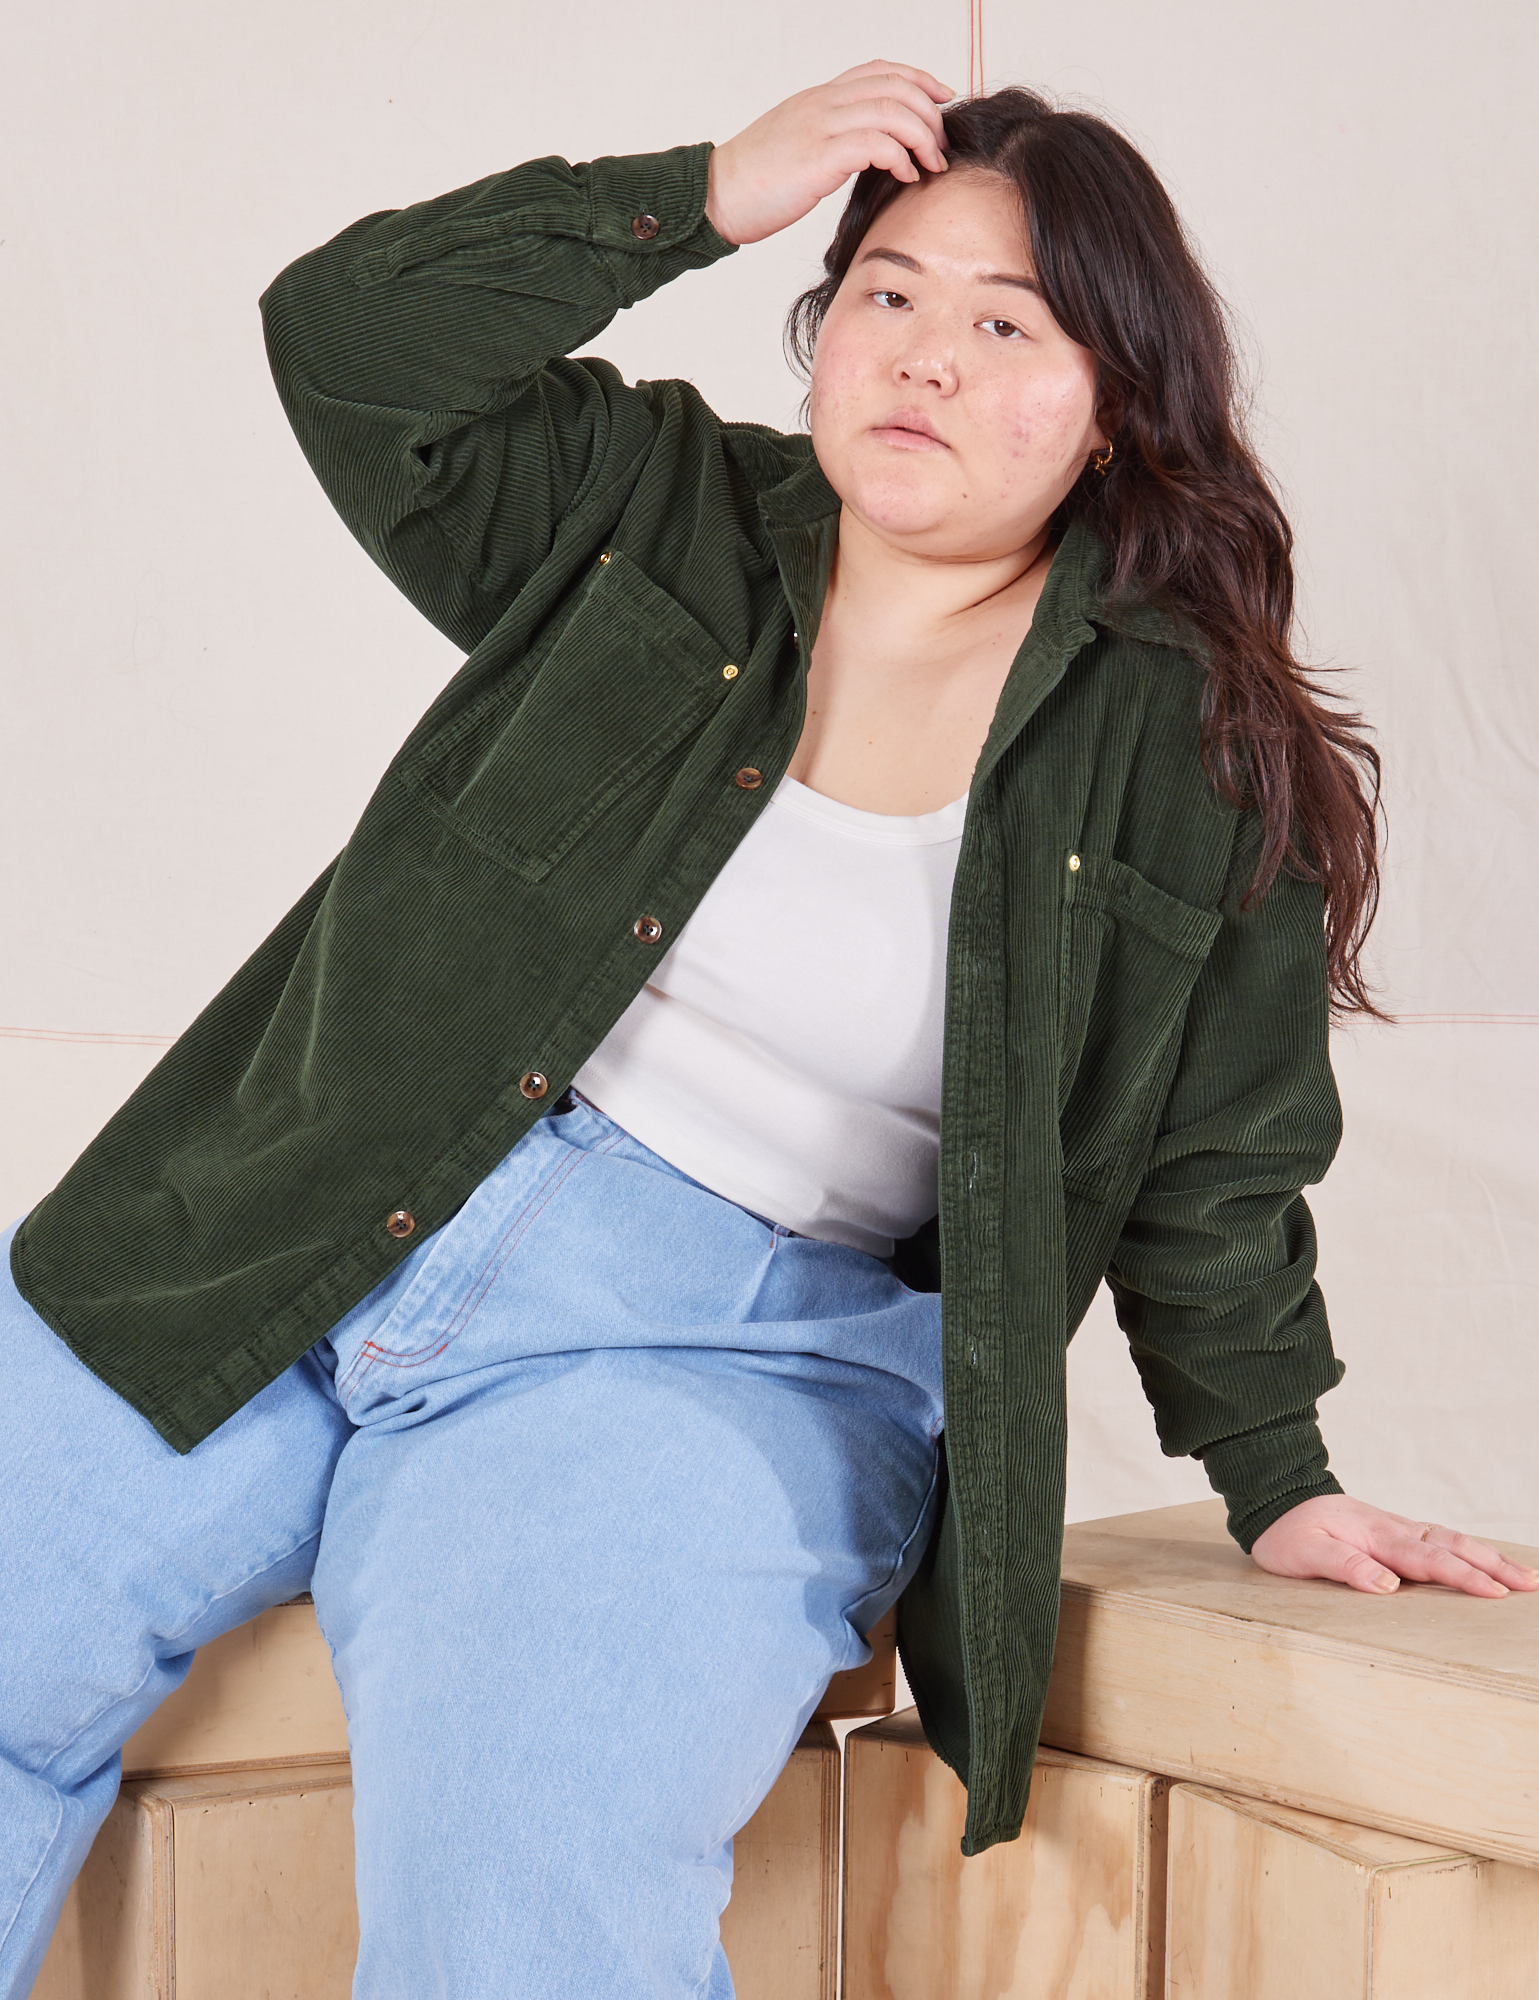 Ashley is wearing Corduroy Overshirt in Swamp Green and light wash Denim Trouser Jeans